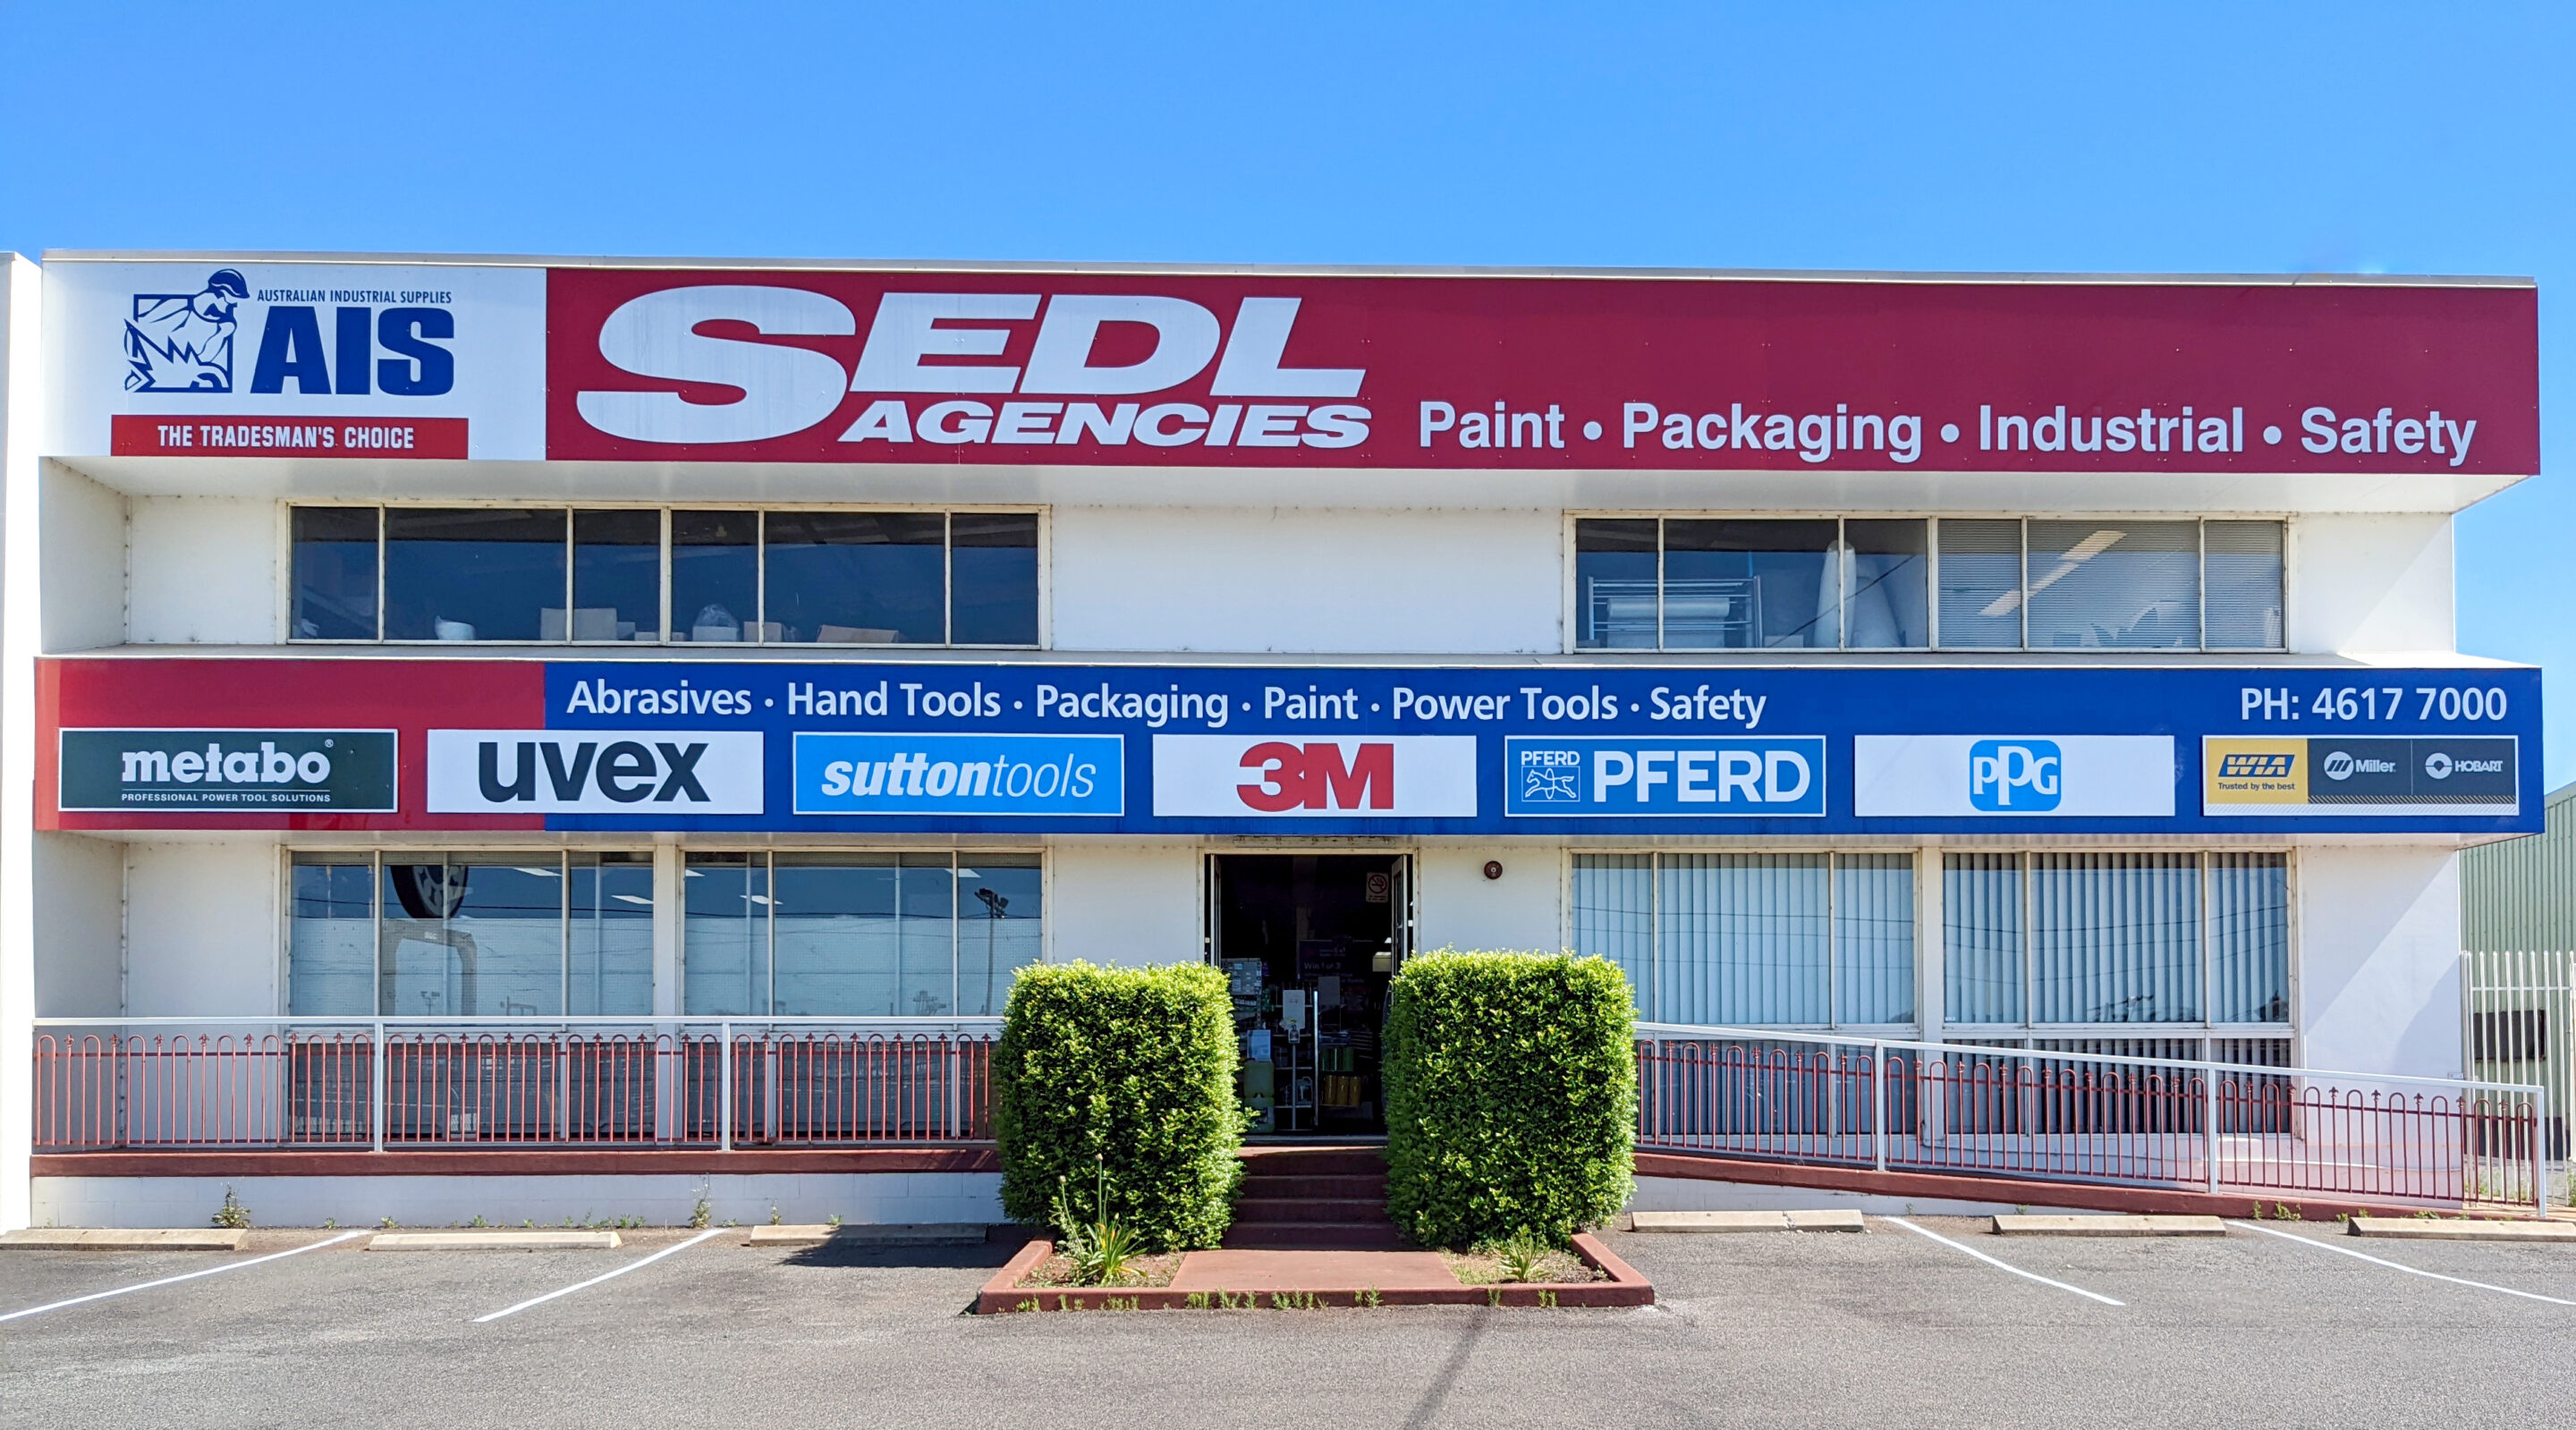 SEDL agencies Toowoomba: Paint, Packaging, Safety, Industrial, AIDCO, and more